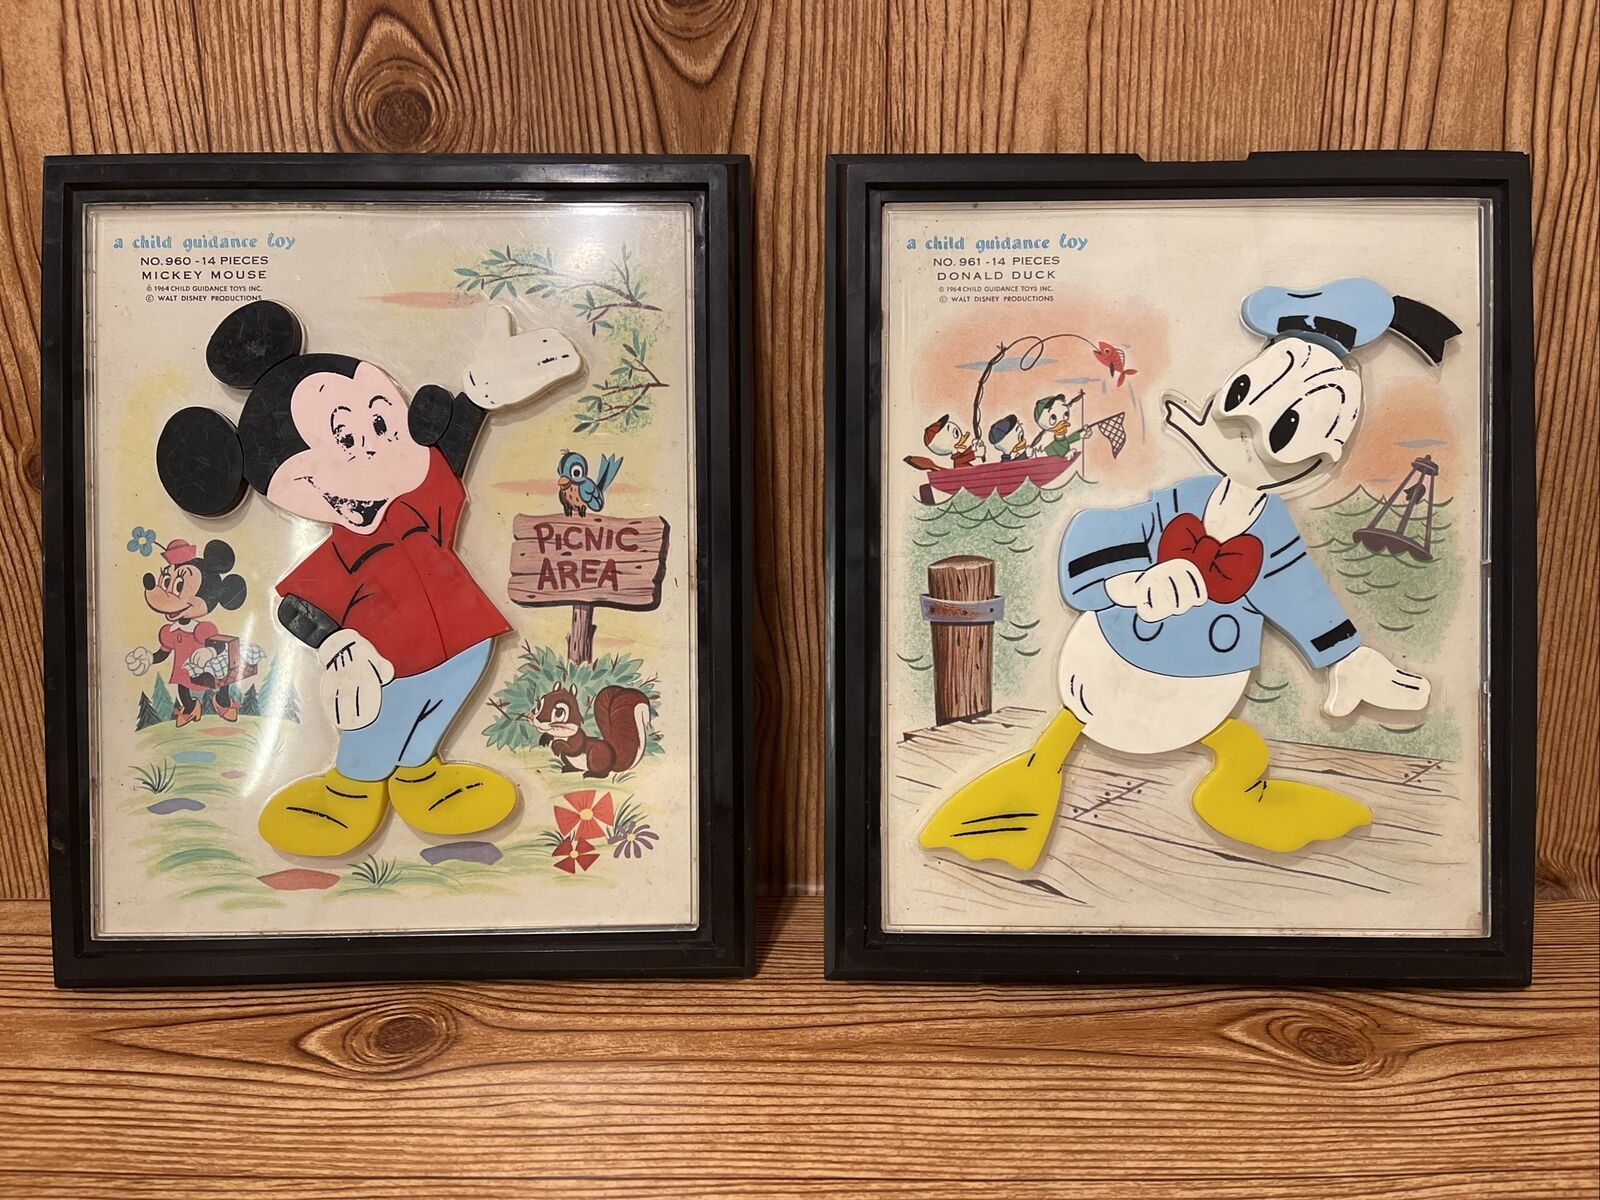 Vintage Walt Disney Child Guidance Toy Mickey Mouse Donald Duck 1964 Framed